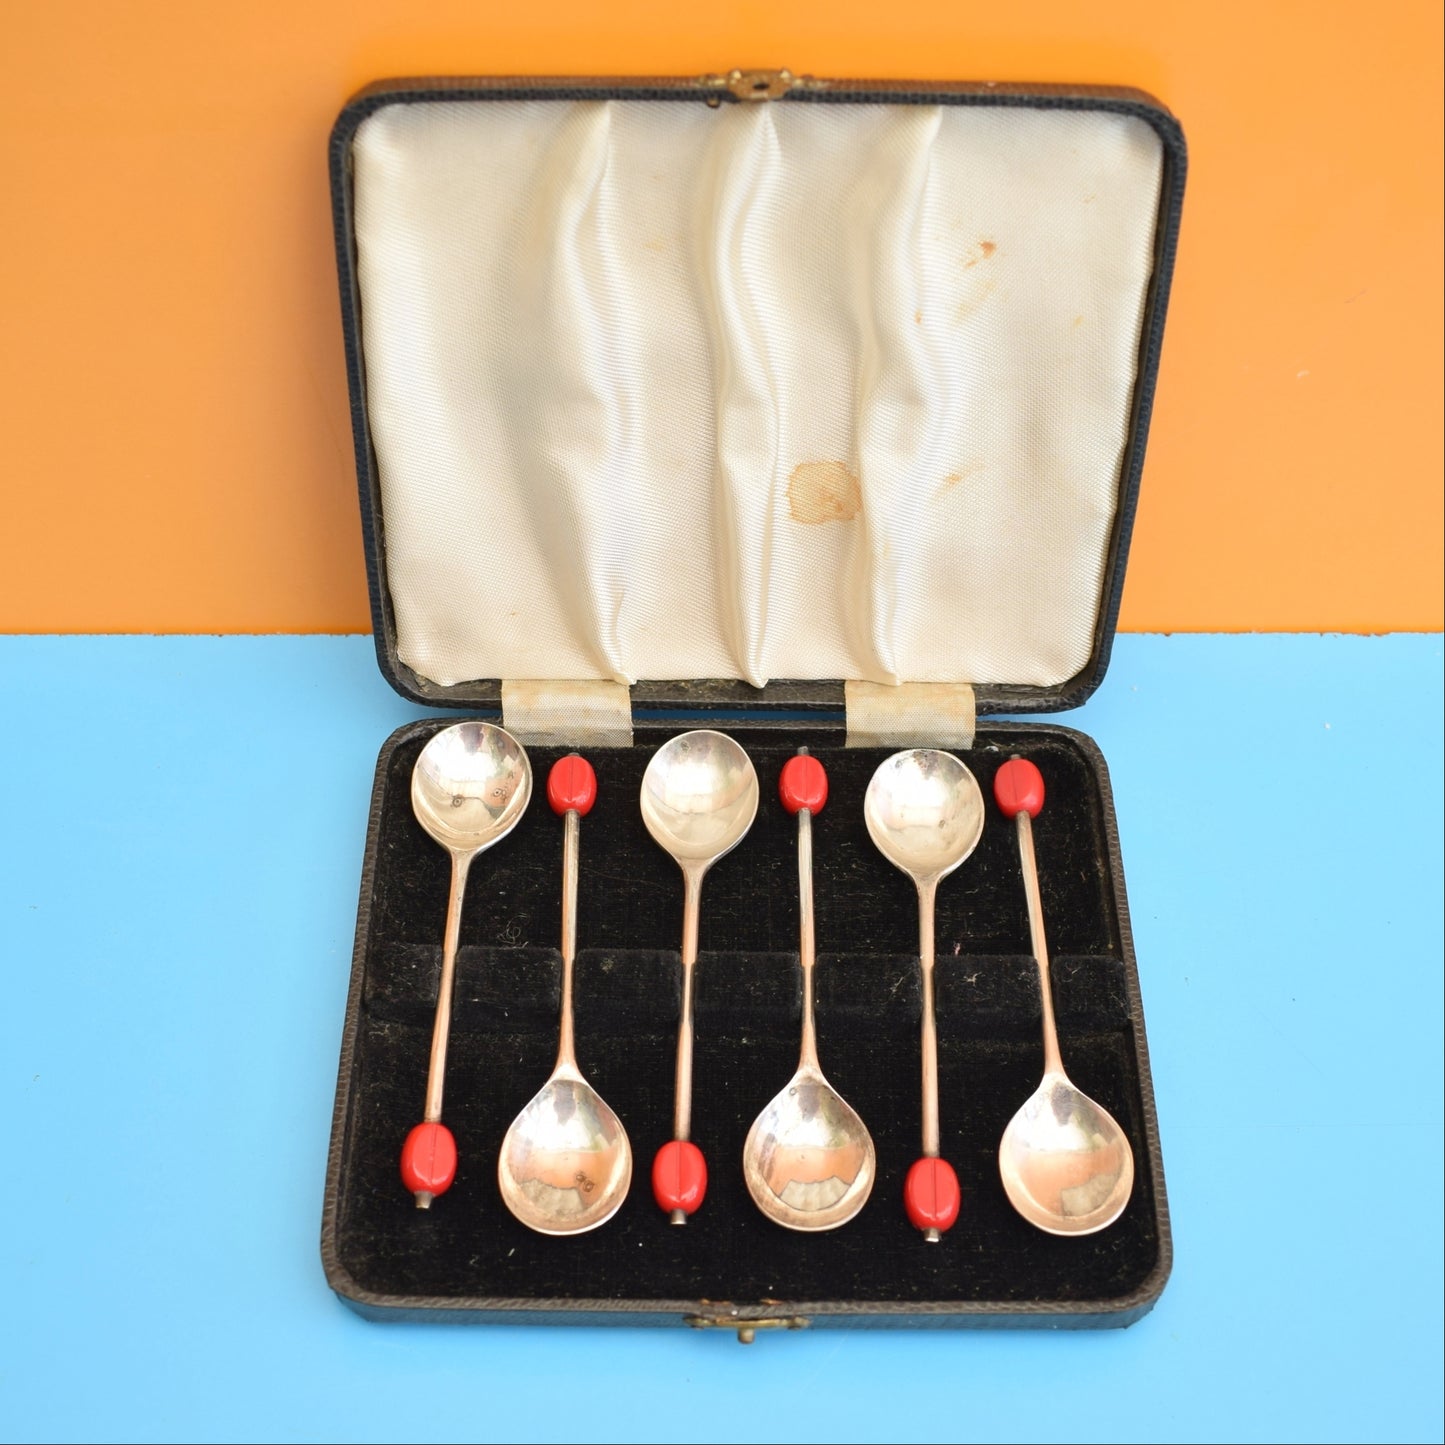 Vintage 1950s Boxed Coffee Bean Spoons - Red